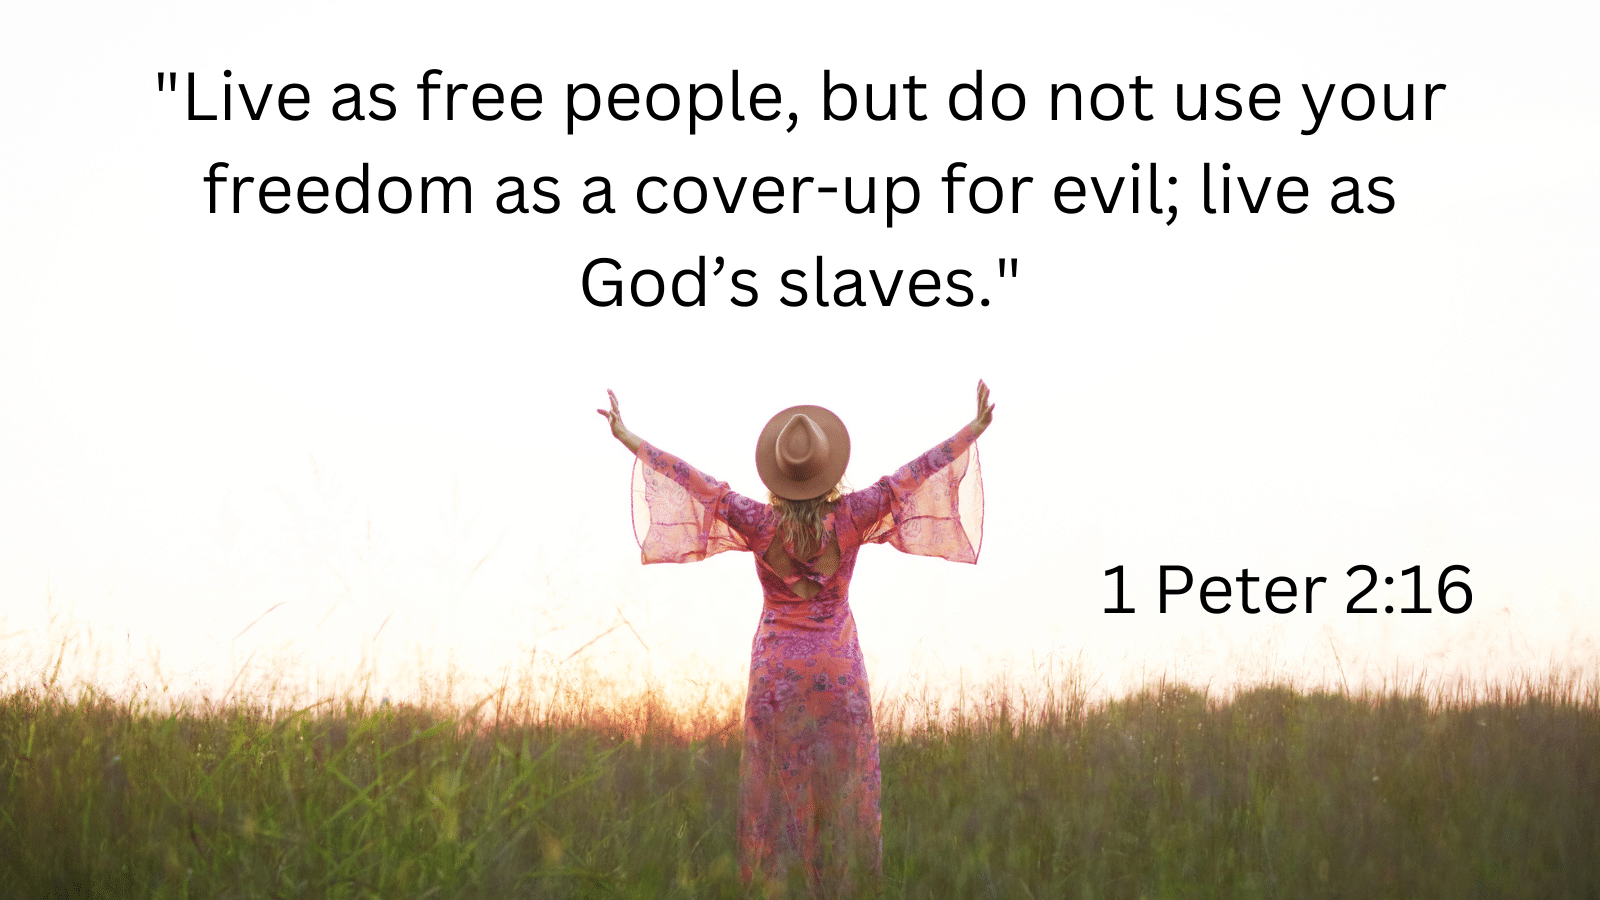 Woman with open arms in field outside with 1 Peter 2:16